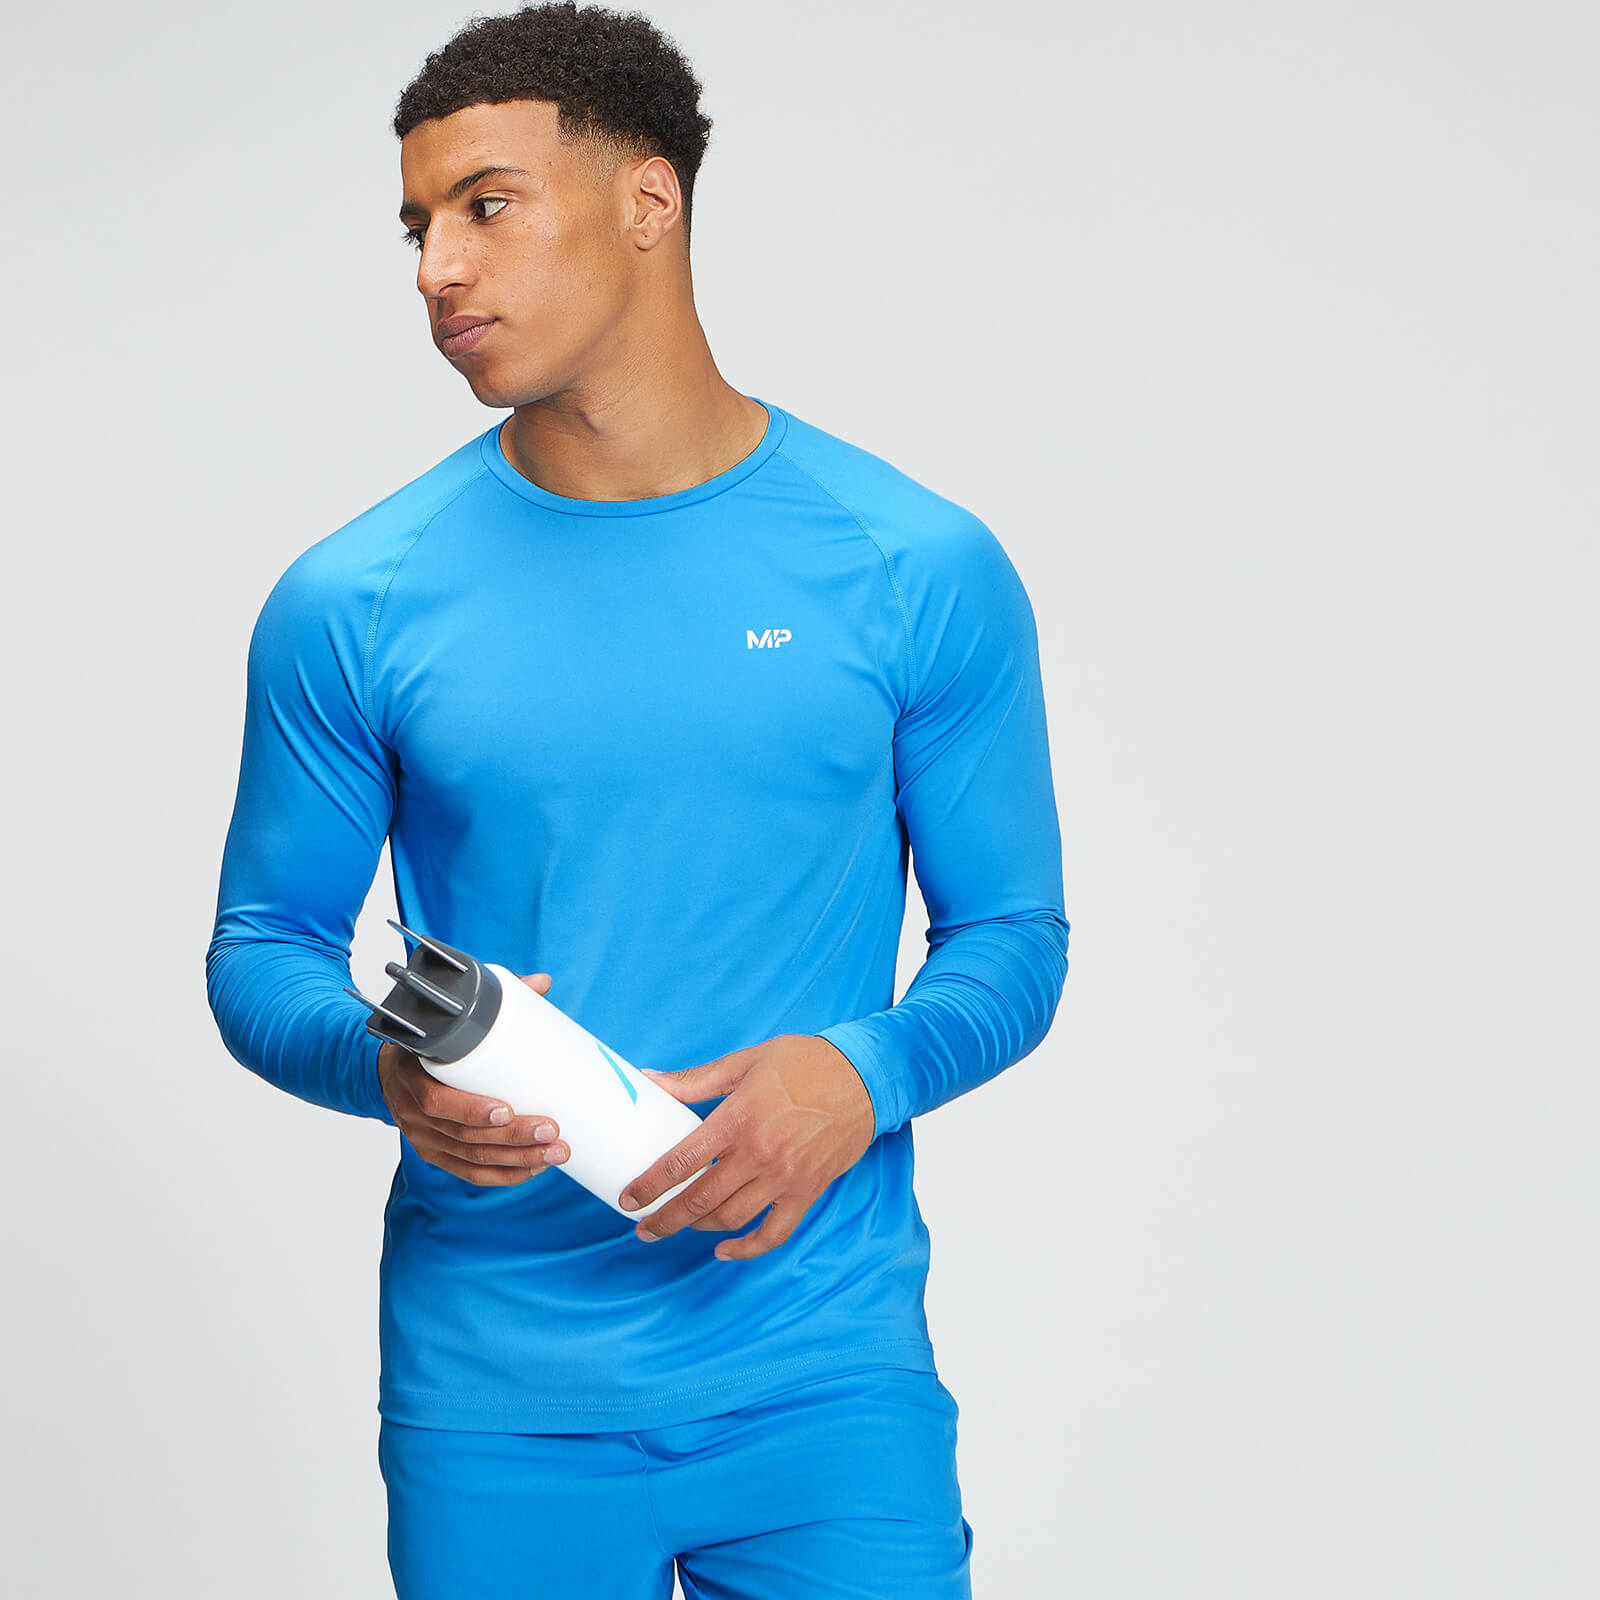 MP Men's Tempo Graphic Long Sleeve Top - Bright Blue - L